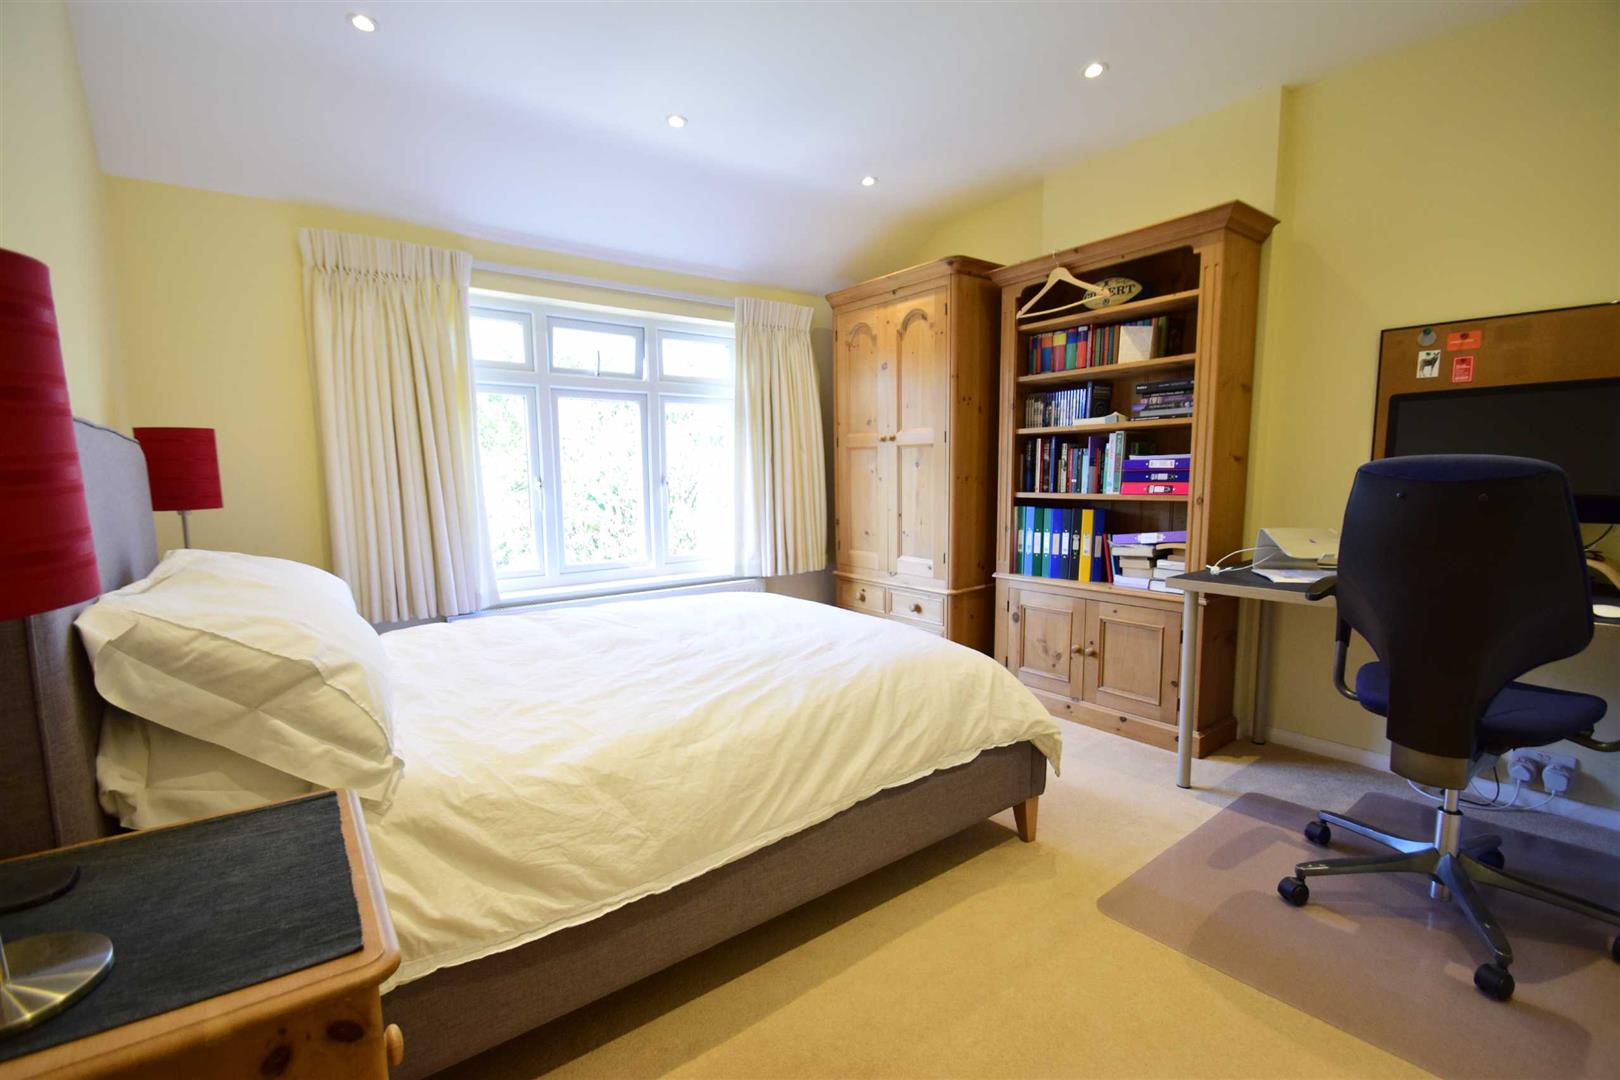 Woodcote Way Caversham Heights house for sale in Reading